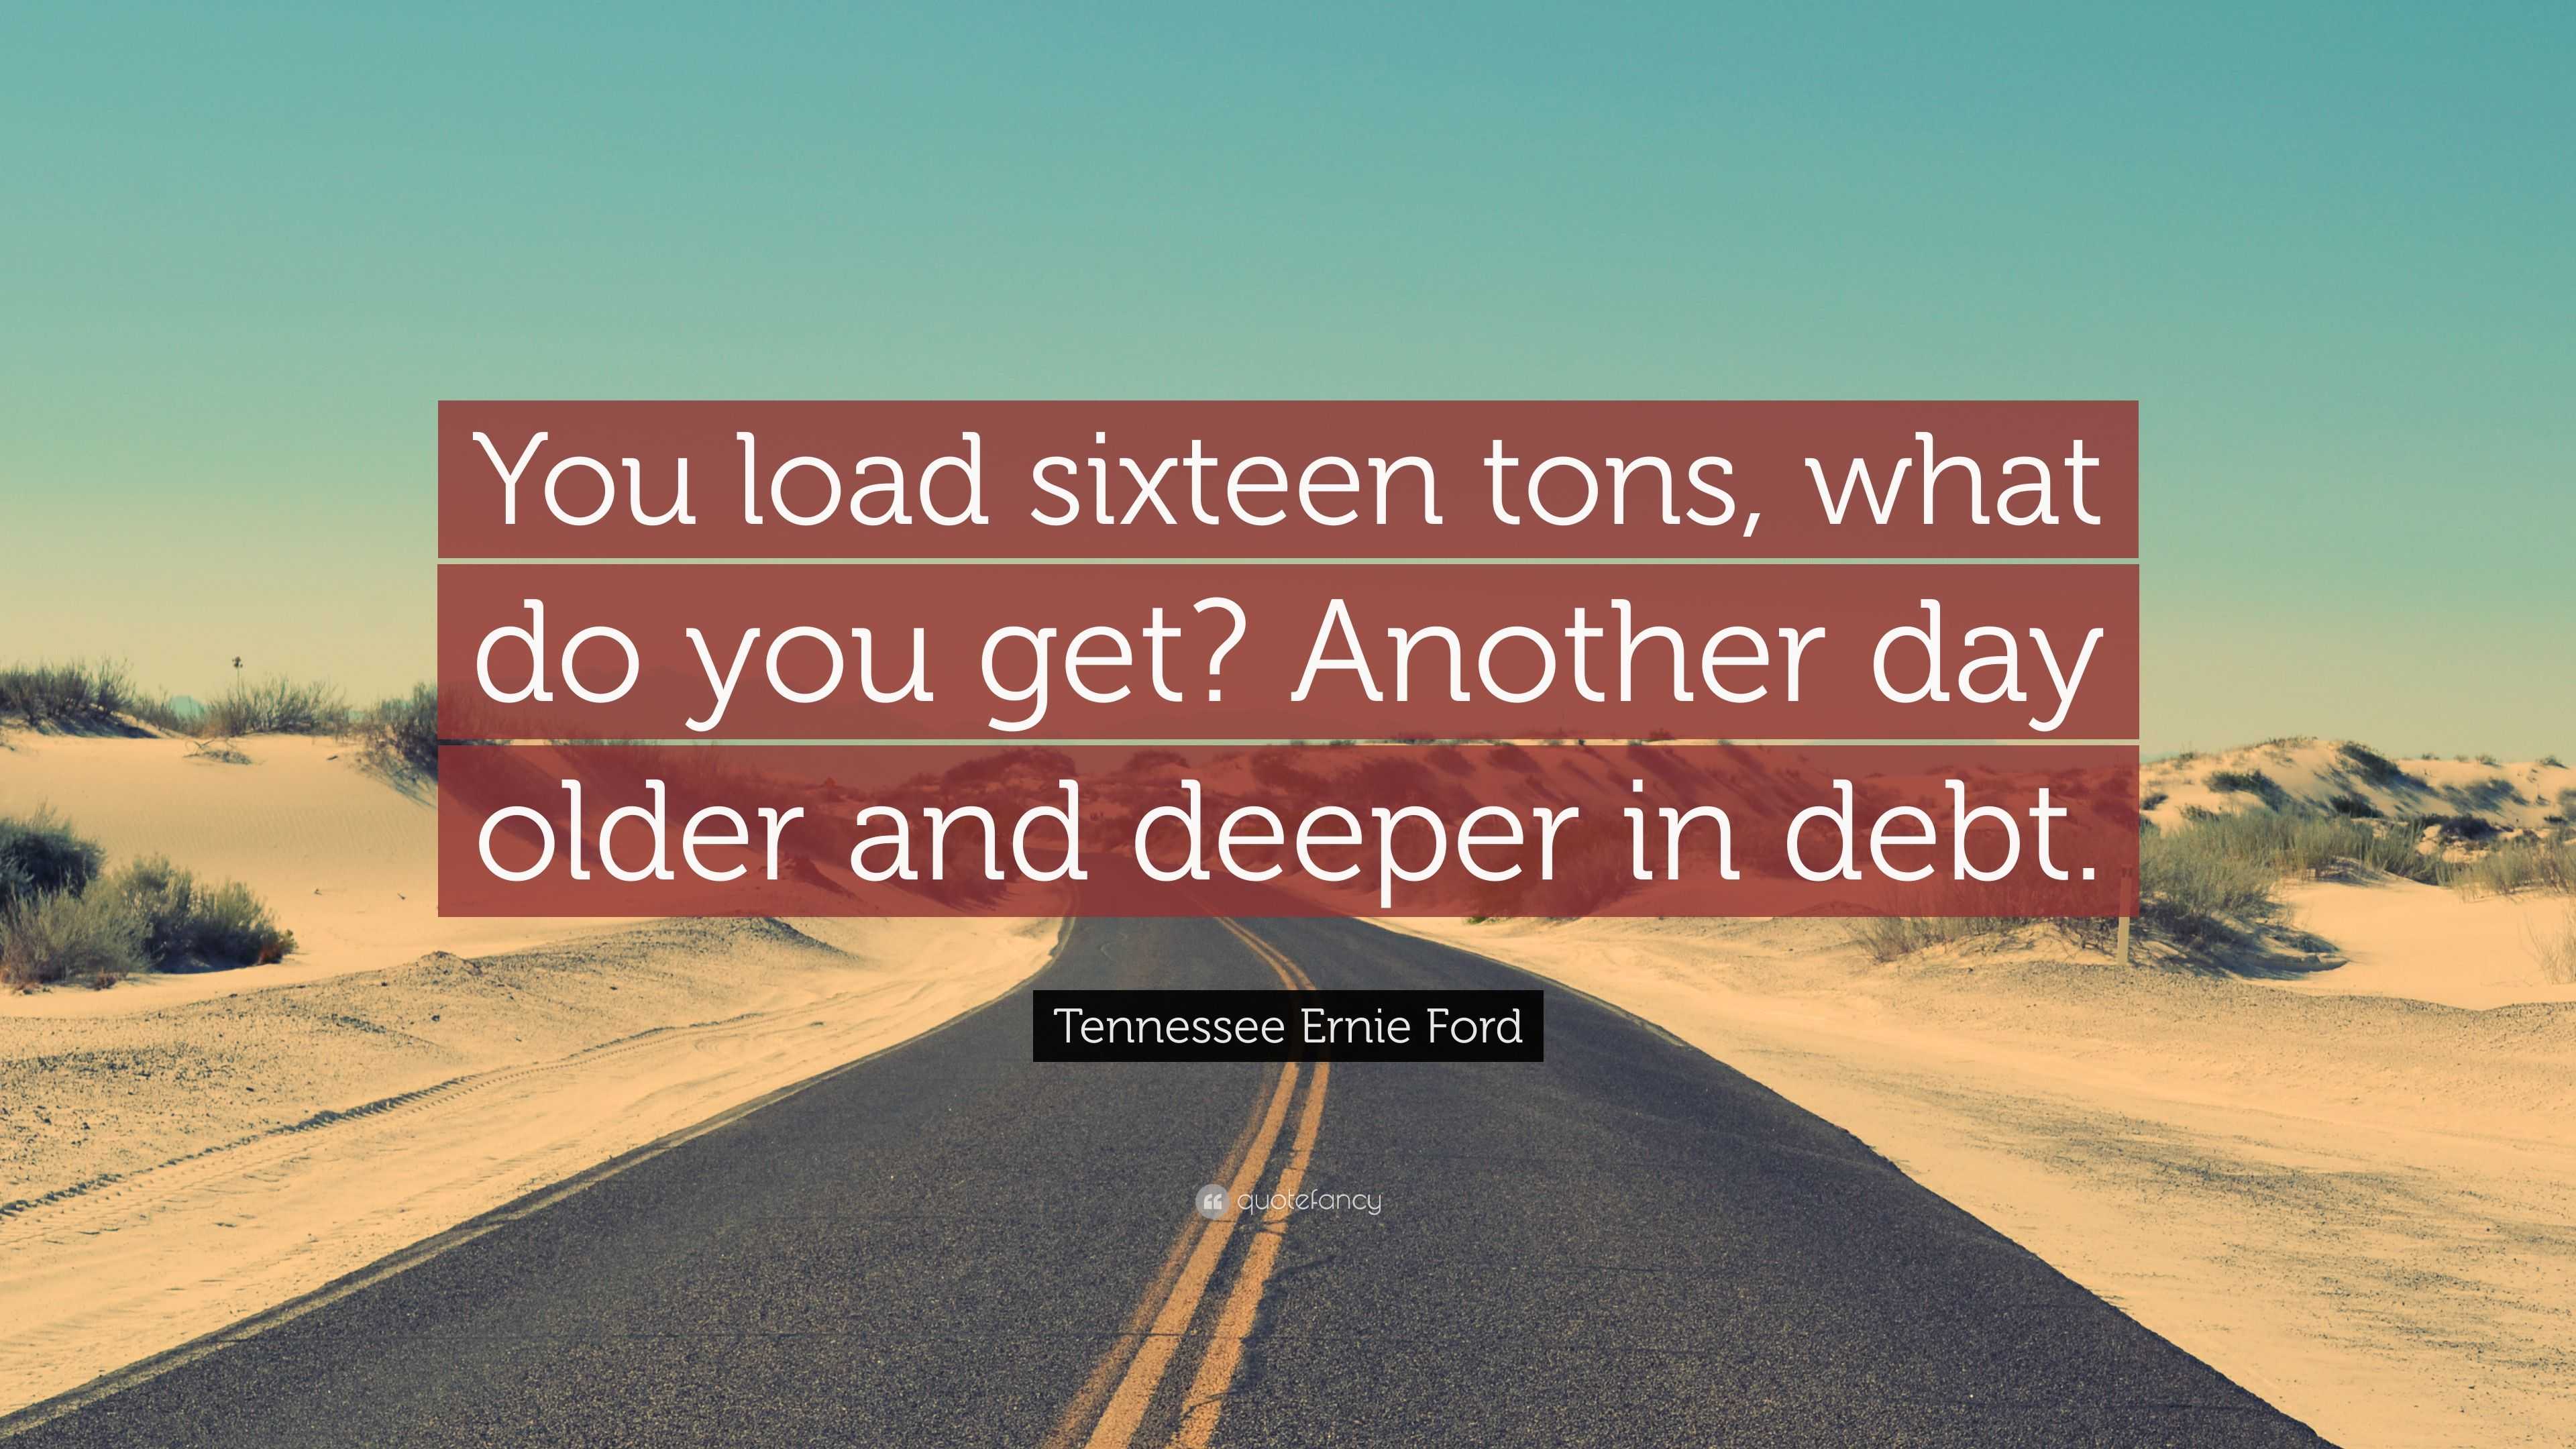 Tennessee Ernie Ford Quote: “You load sixteen tons, do you get? day older and